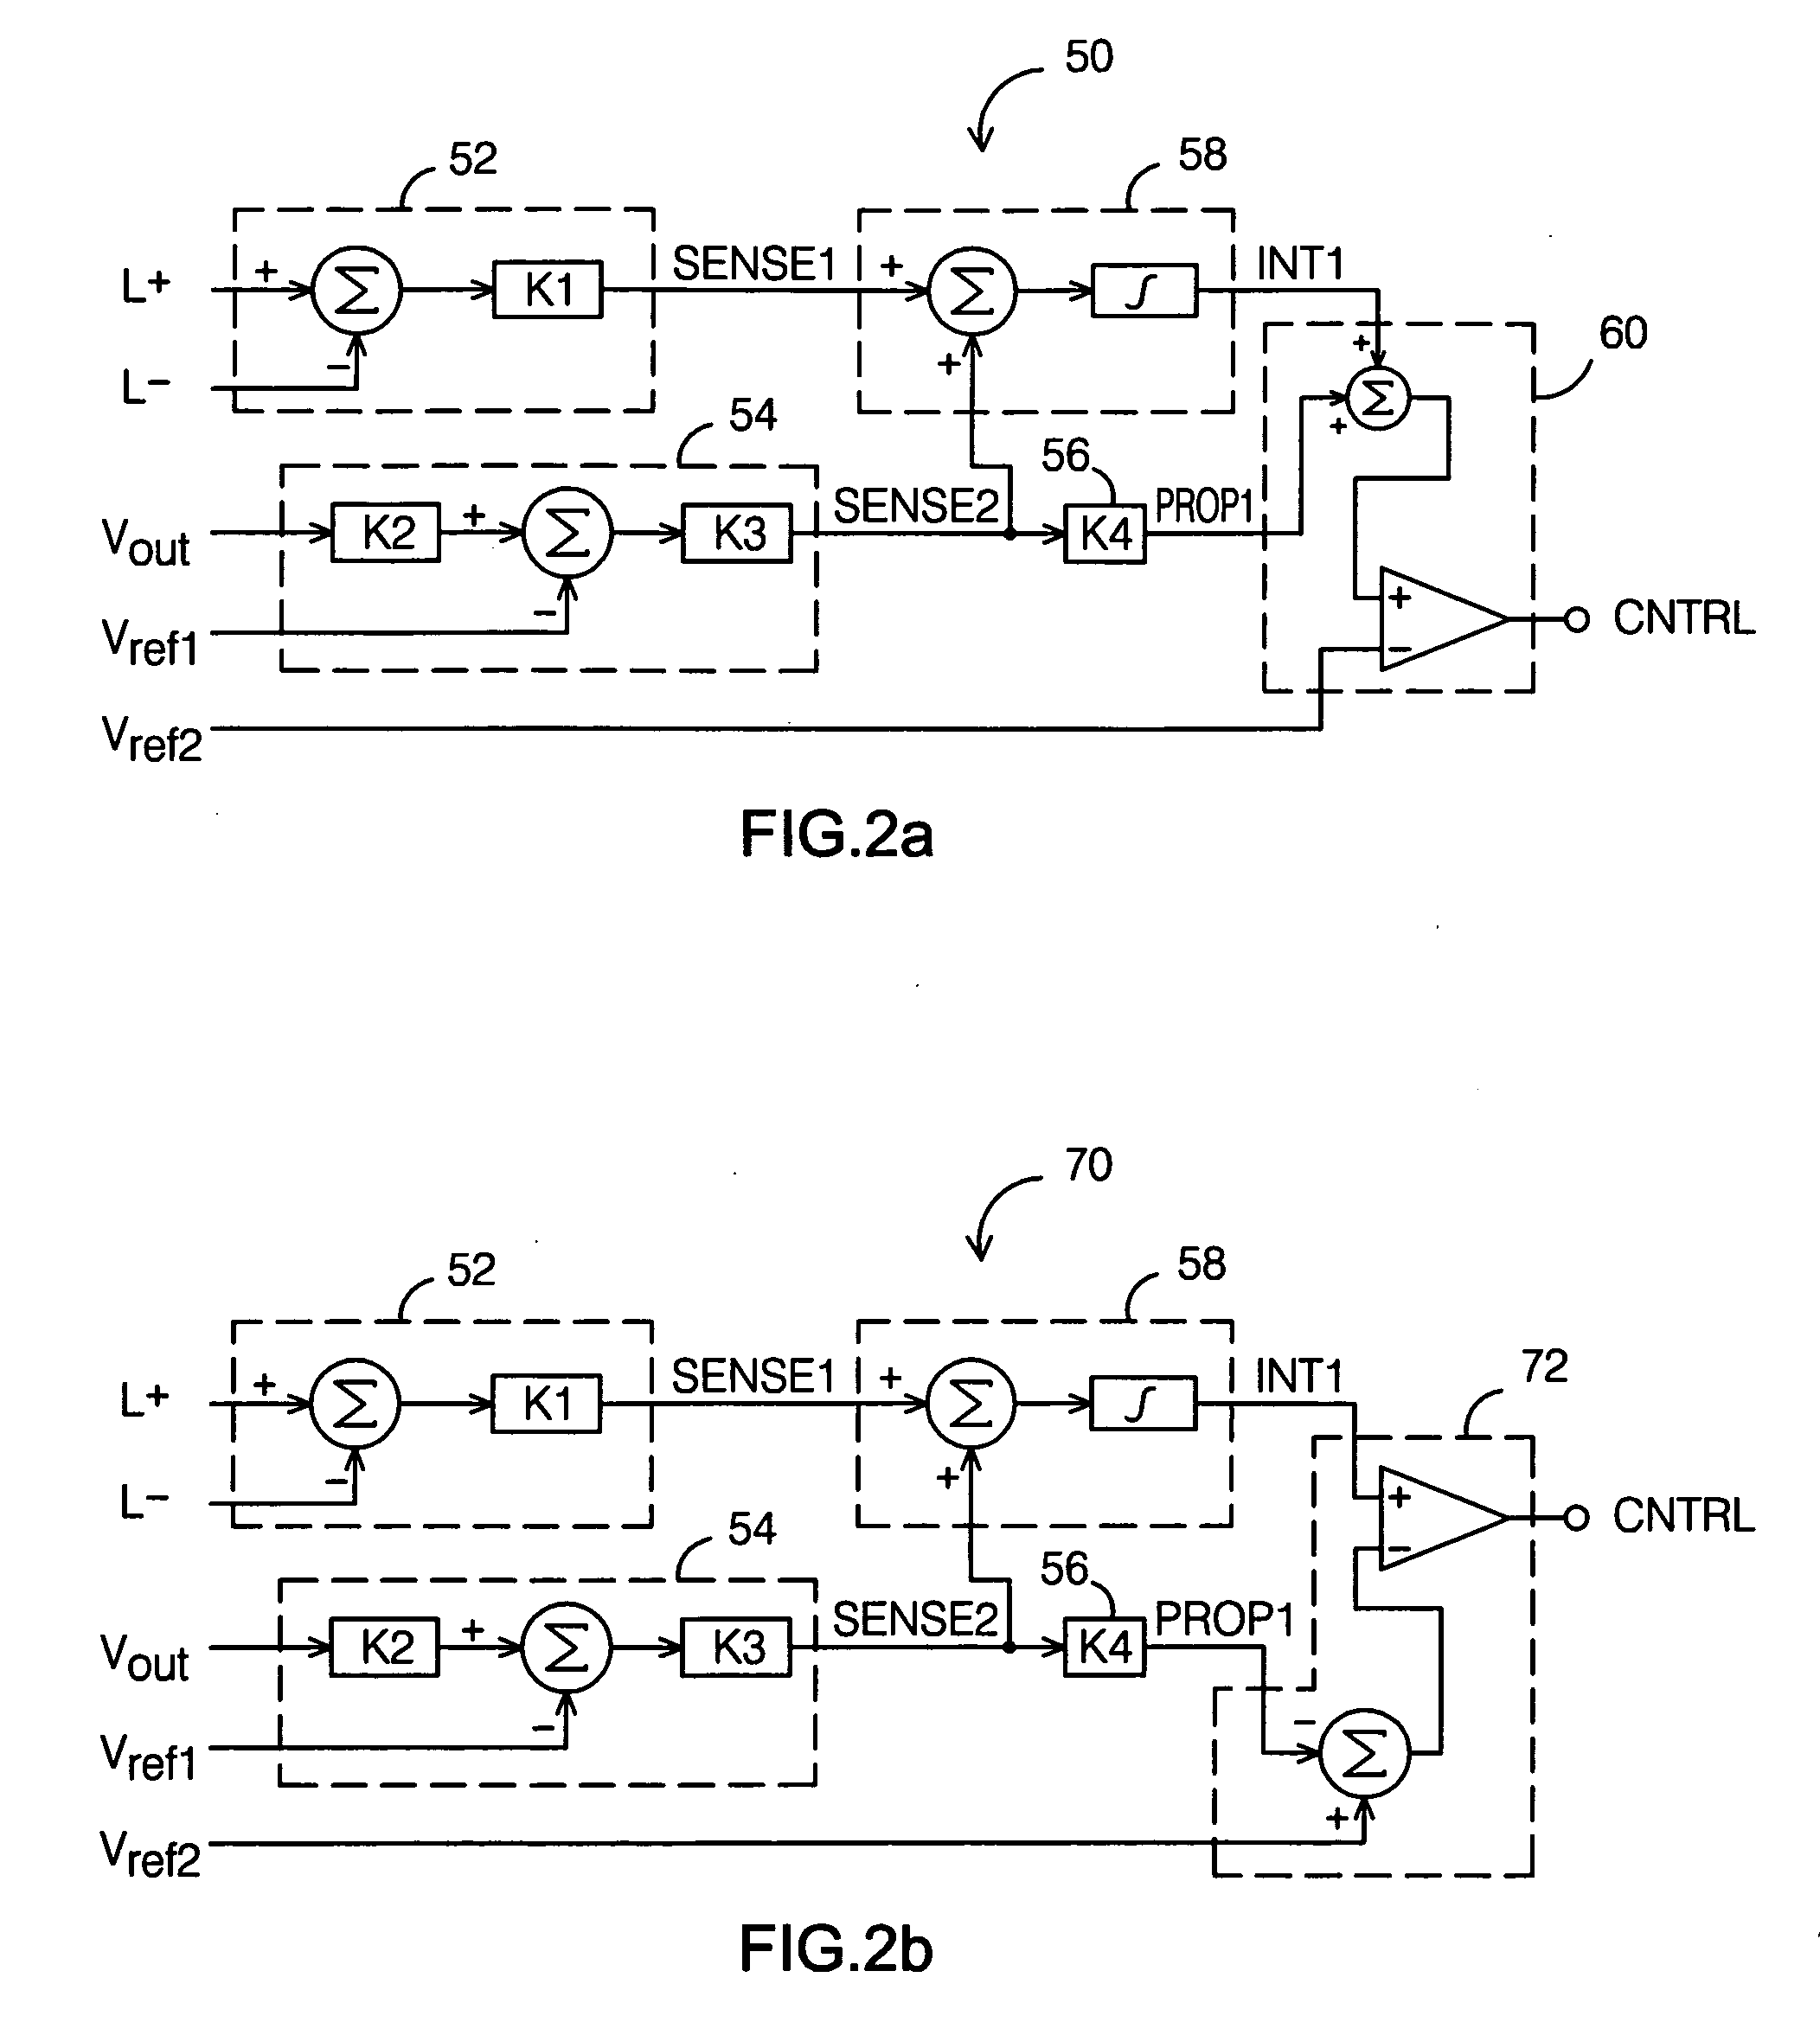 Single integrator sensorless current mode control for a switching power converter